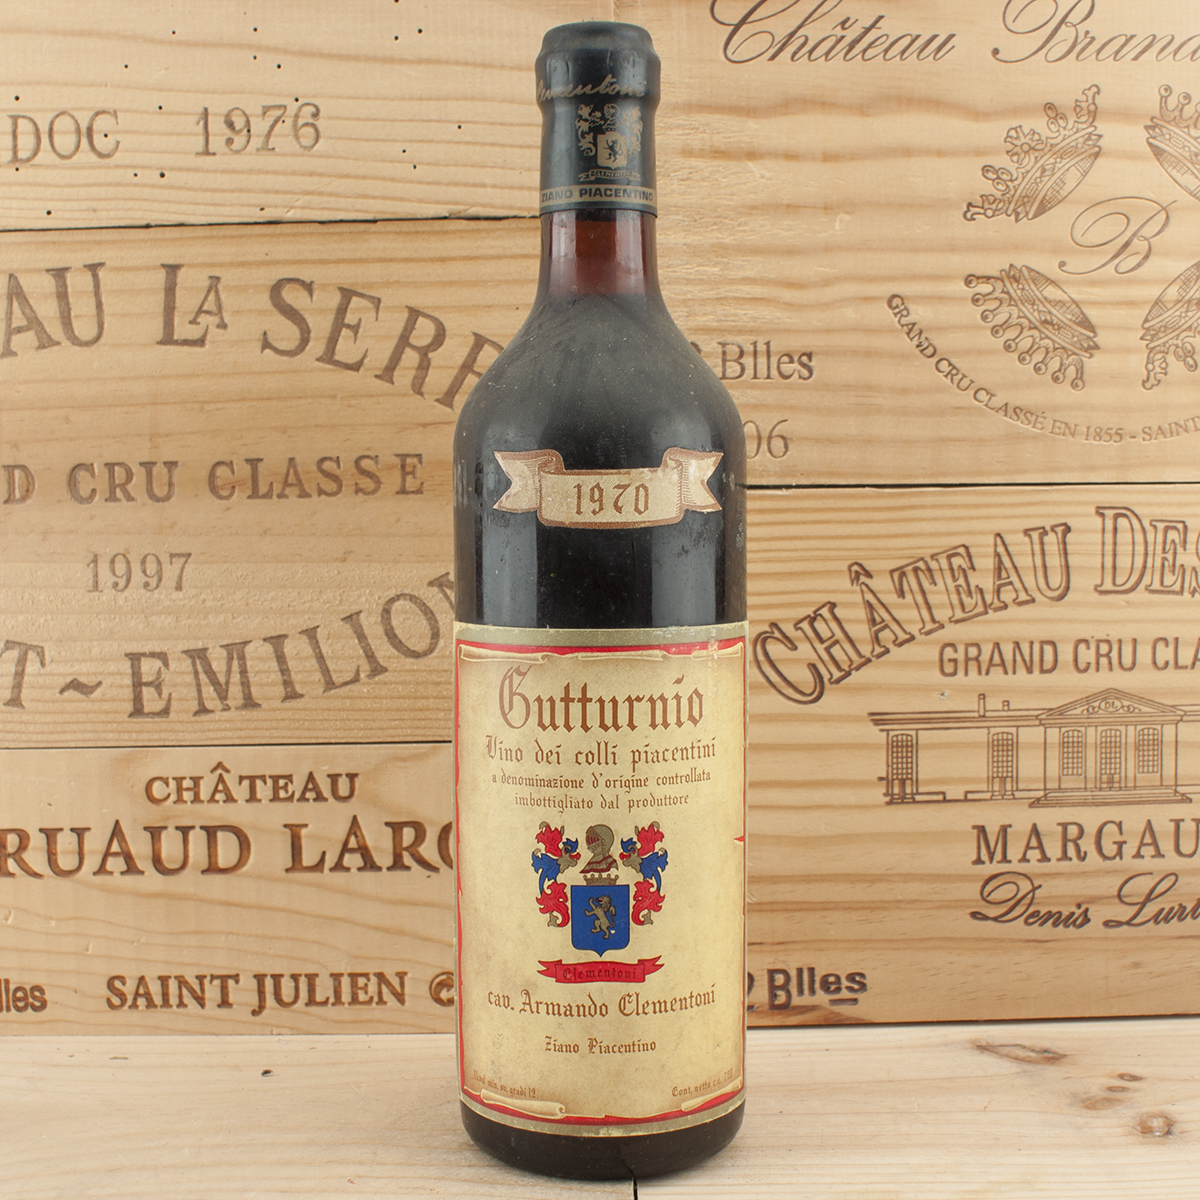 1970 Gutturnio Clementoni in the red box